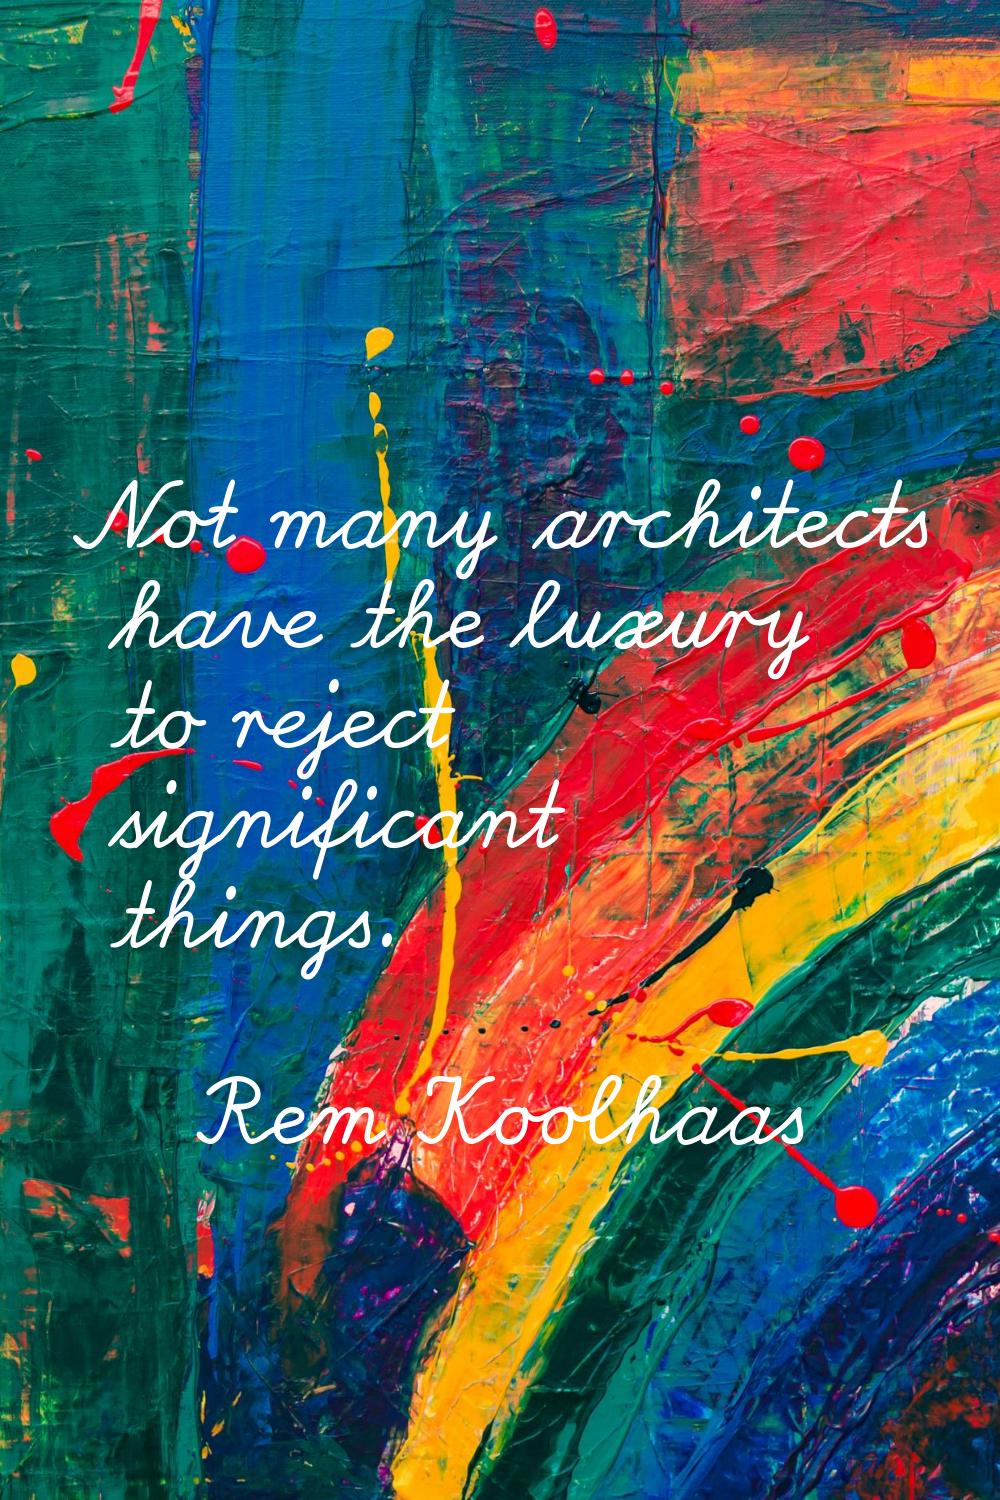 Not many architects have the luxury to reject significant things.